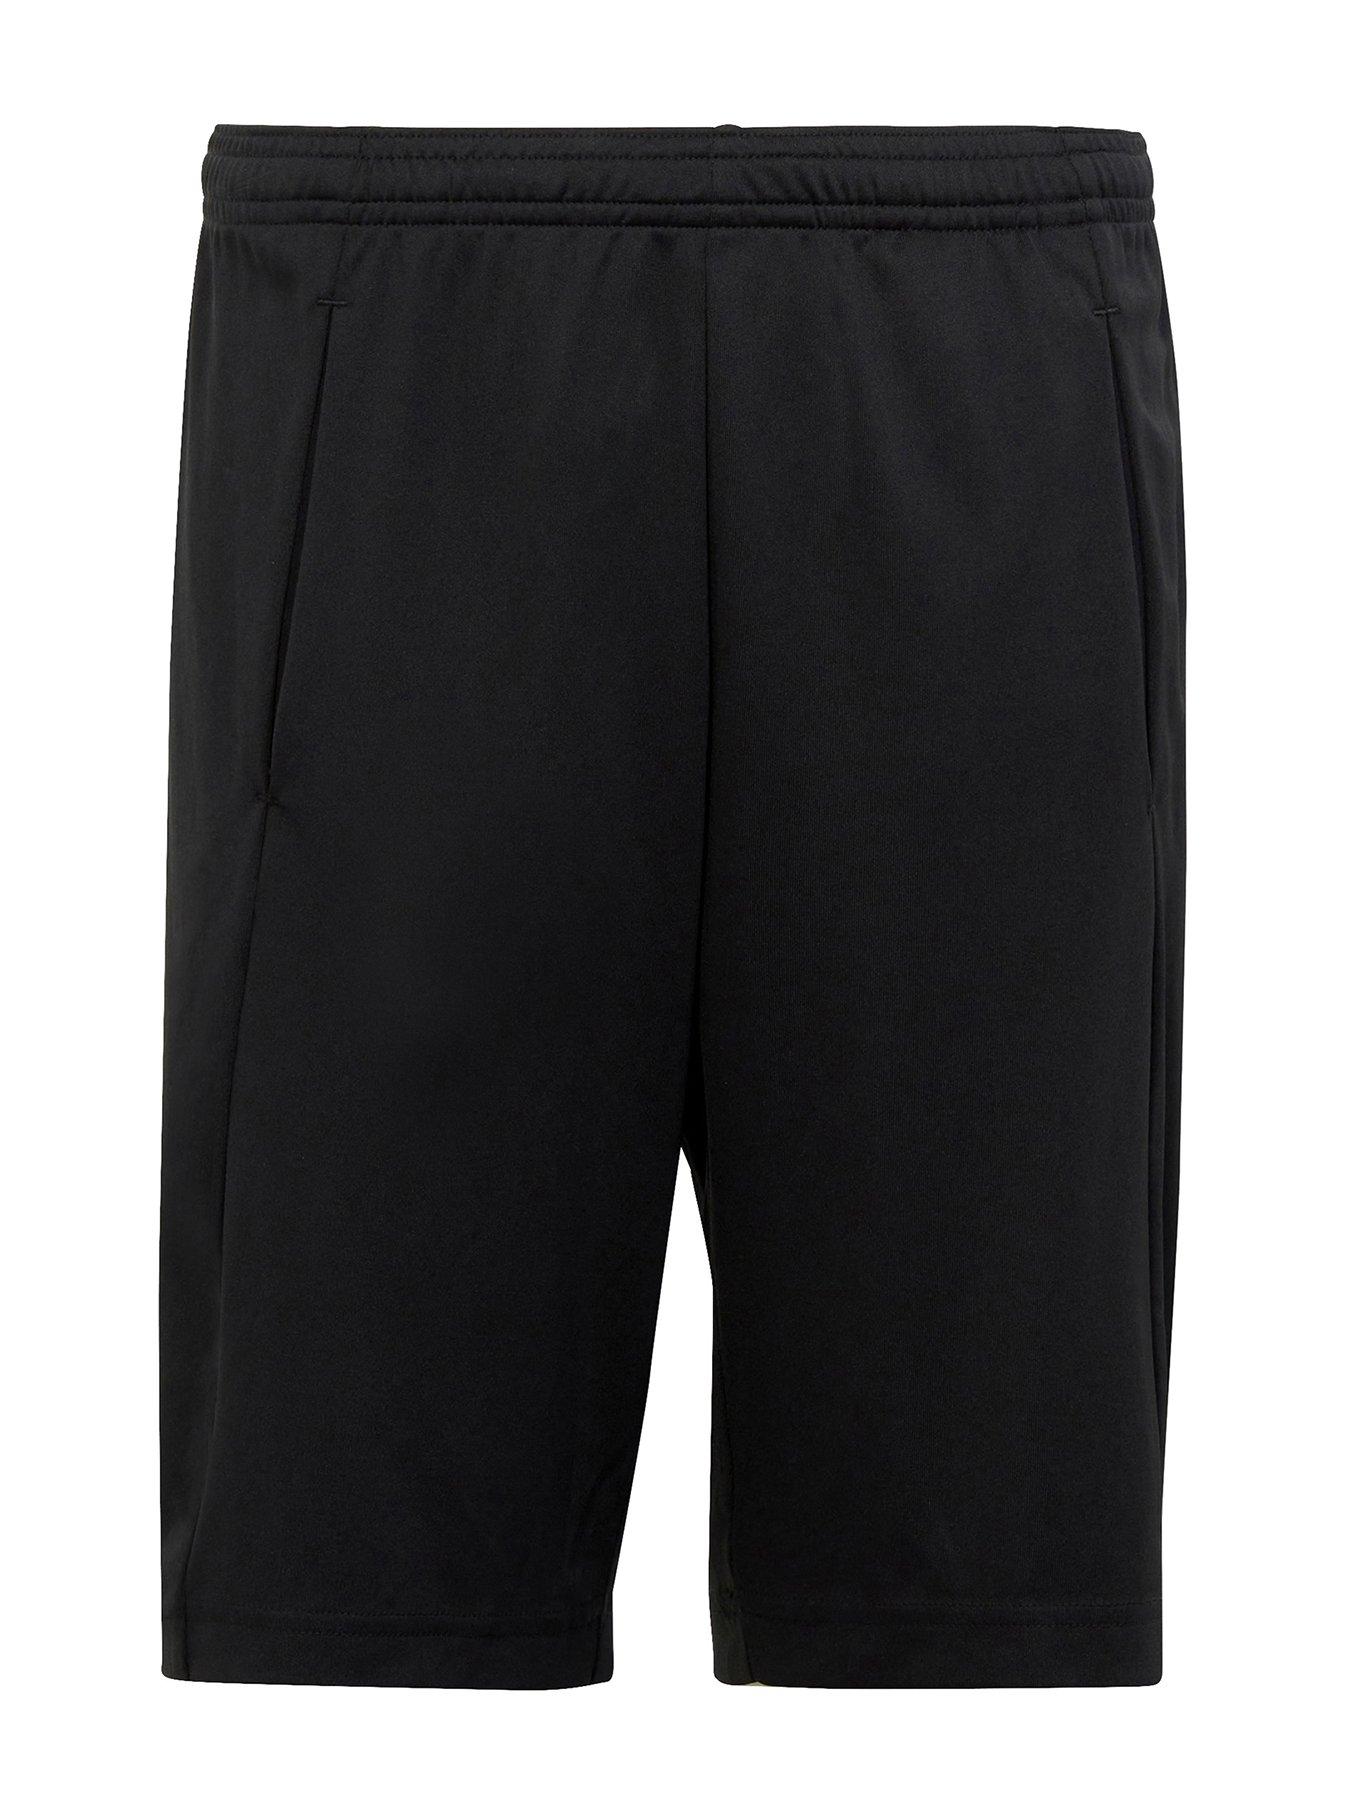 Yours Seamless Control Short - Black